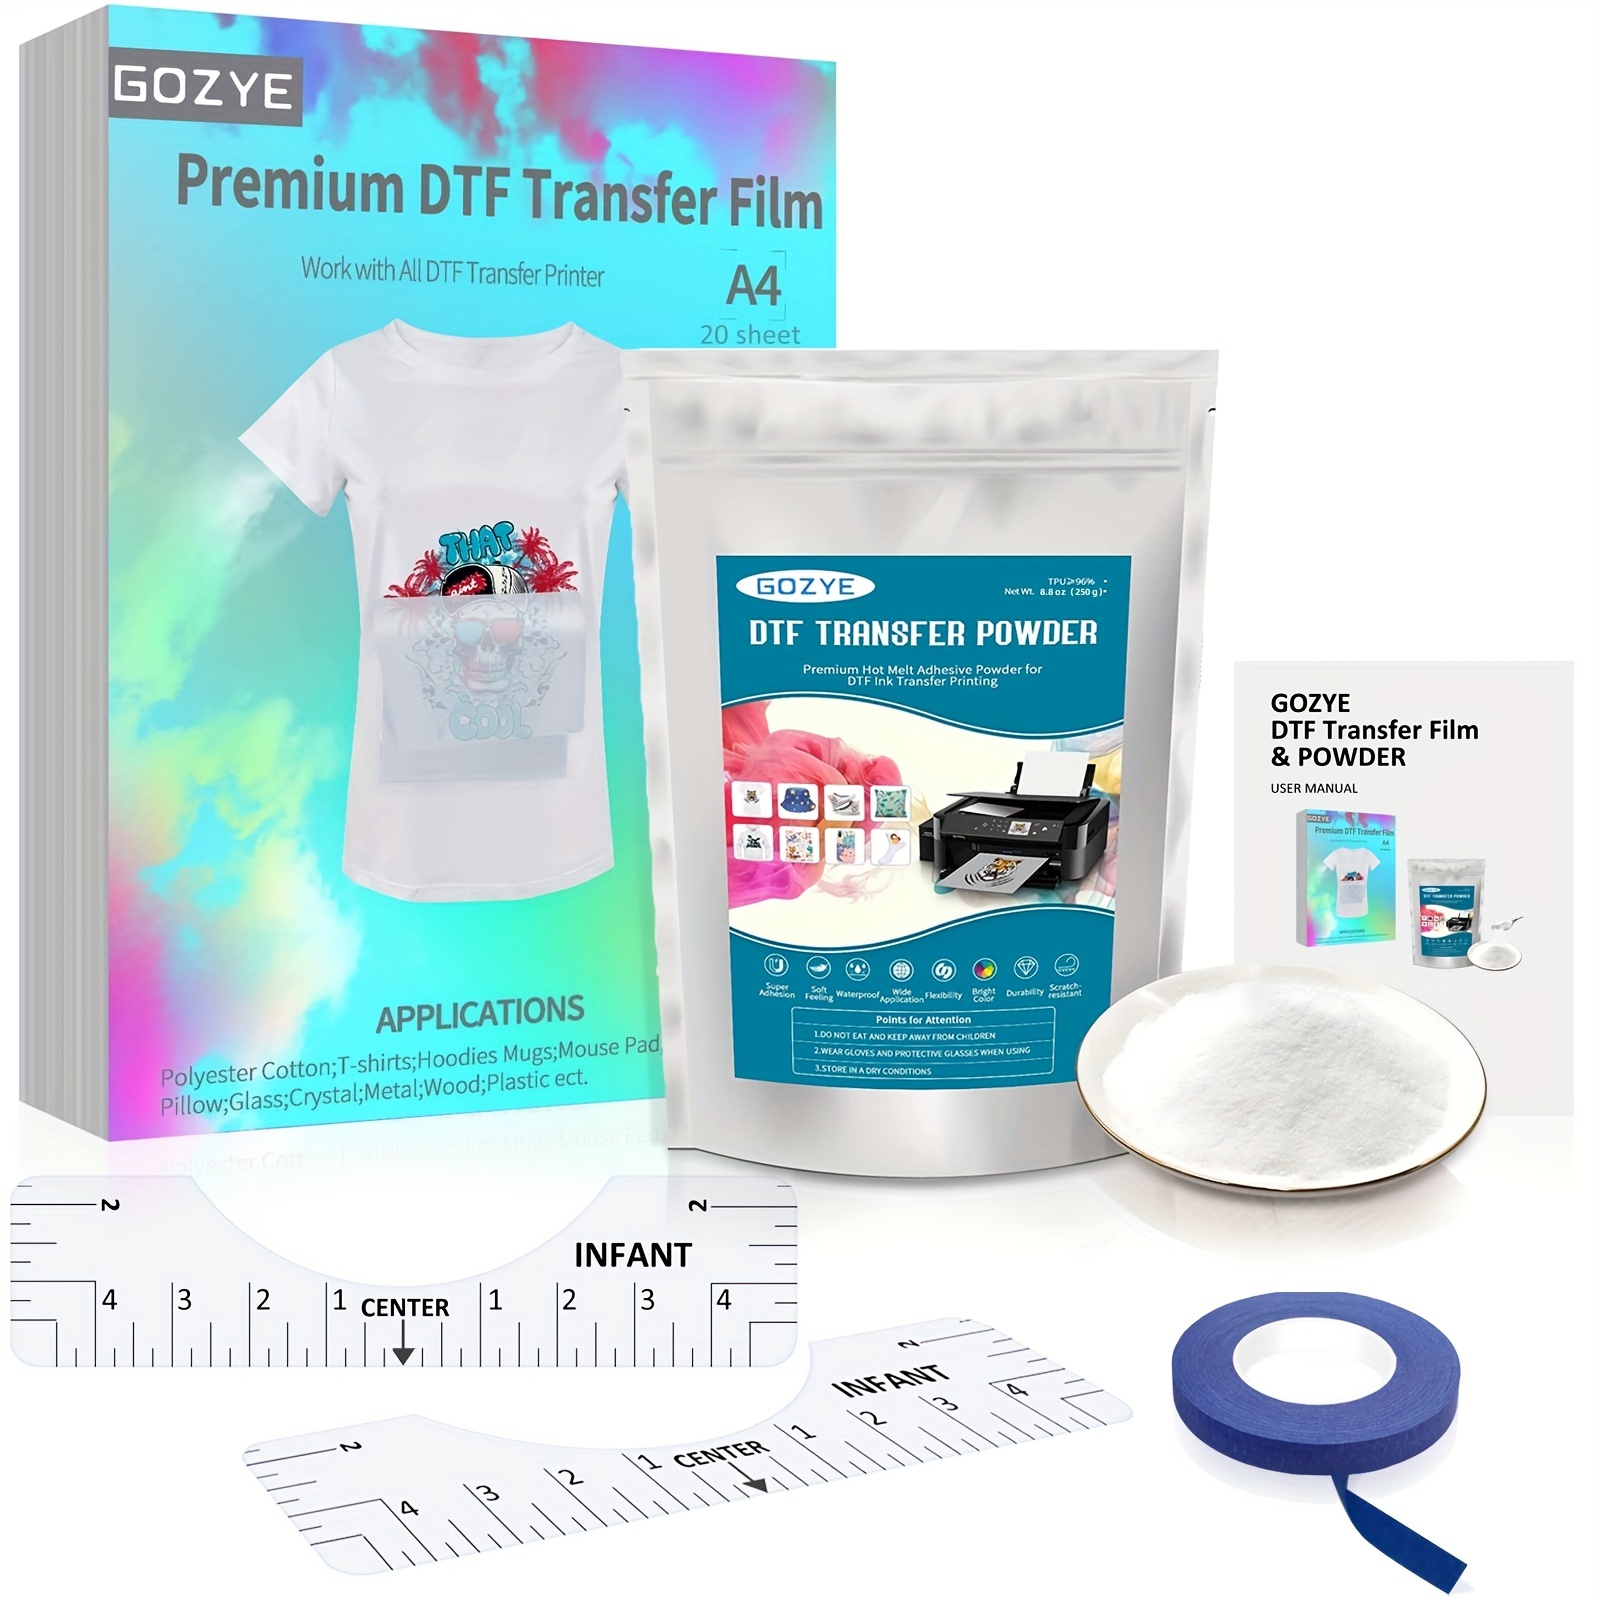 DTF Transfer Paper Transfer Film DTF Powder for Sublimation & Heat Transfer  - DTF Hot Melt Adhesive Powder for All DTF and DTG Printers on Waterproof